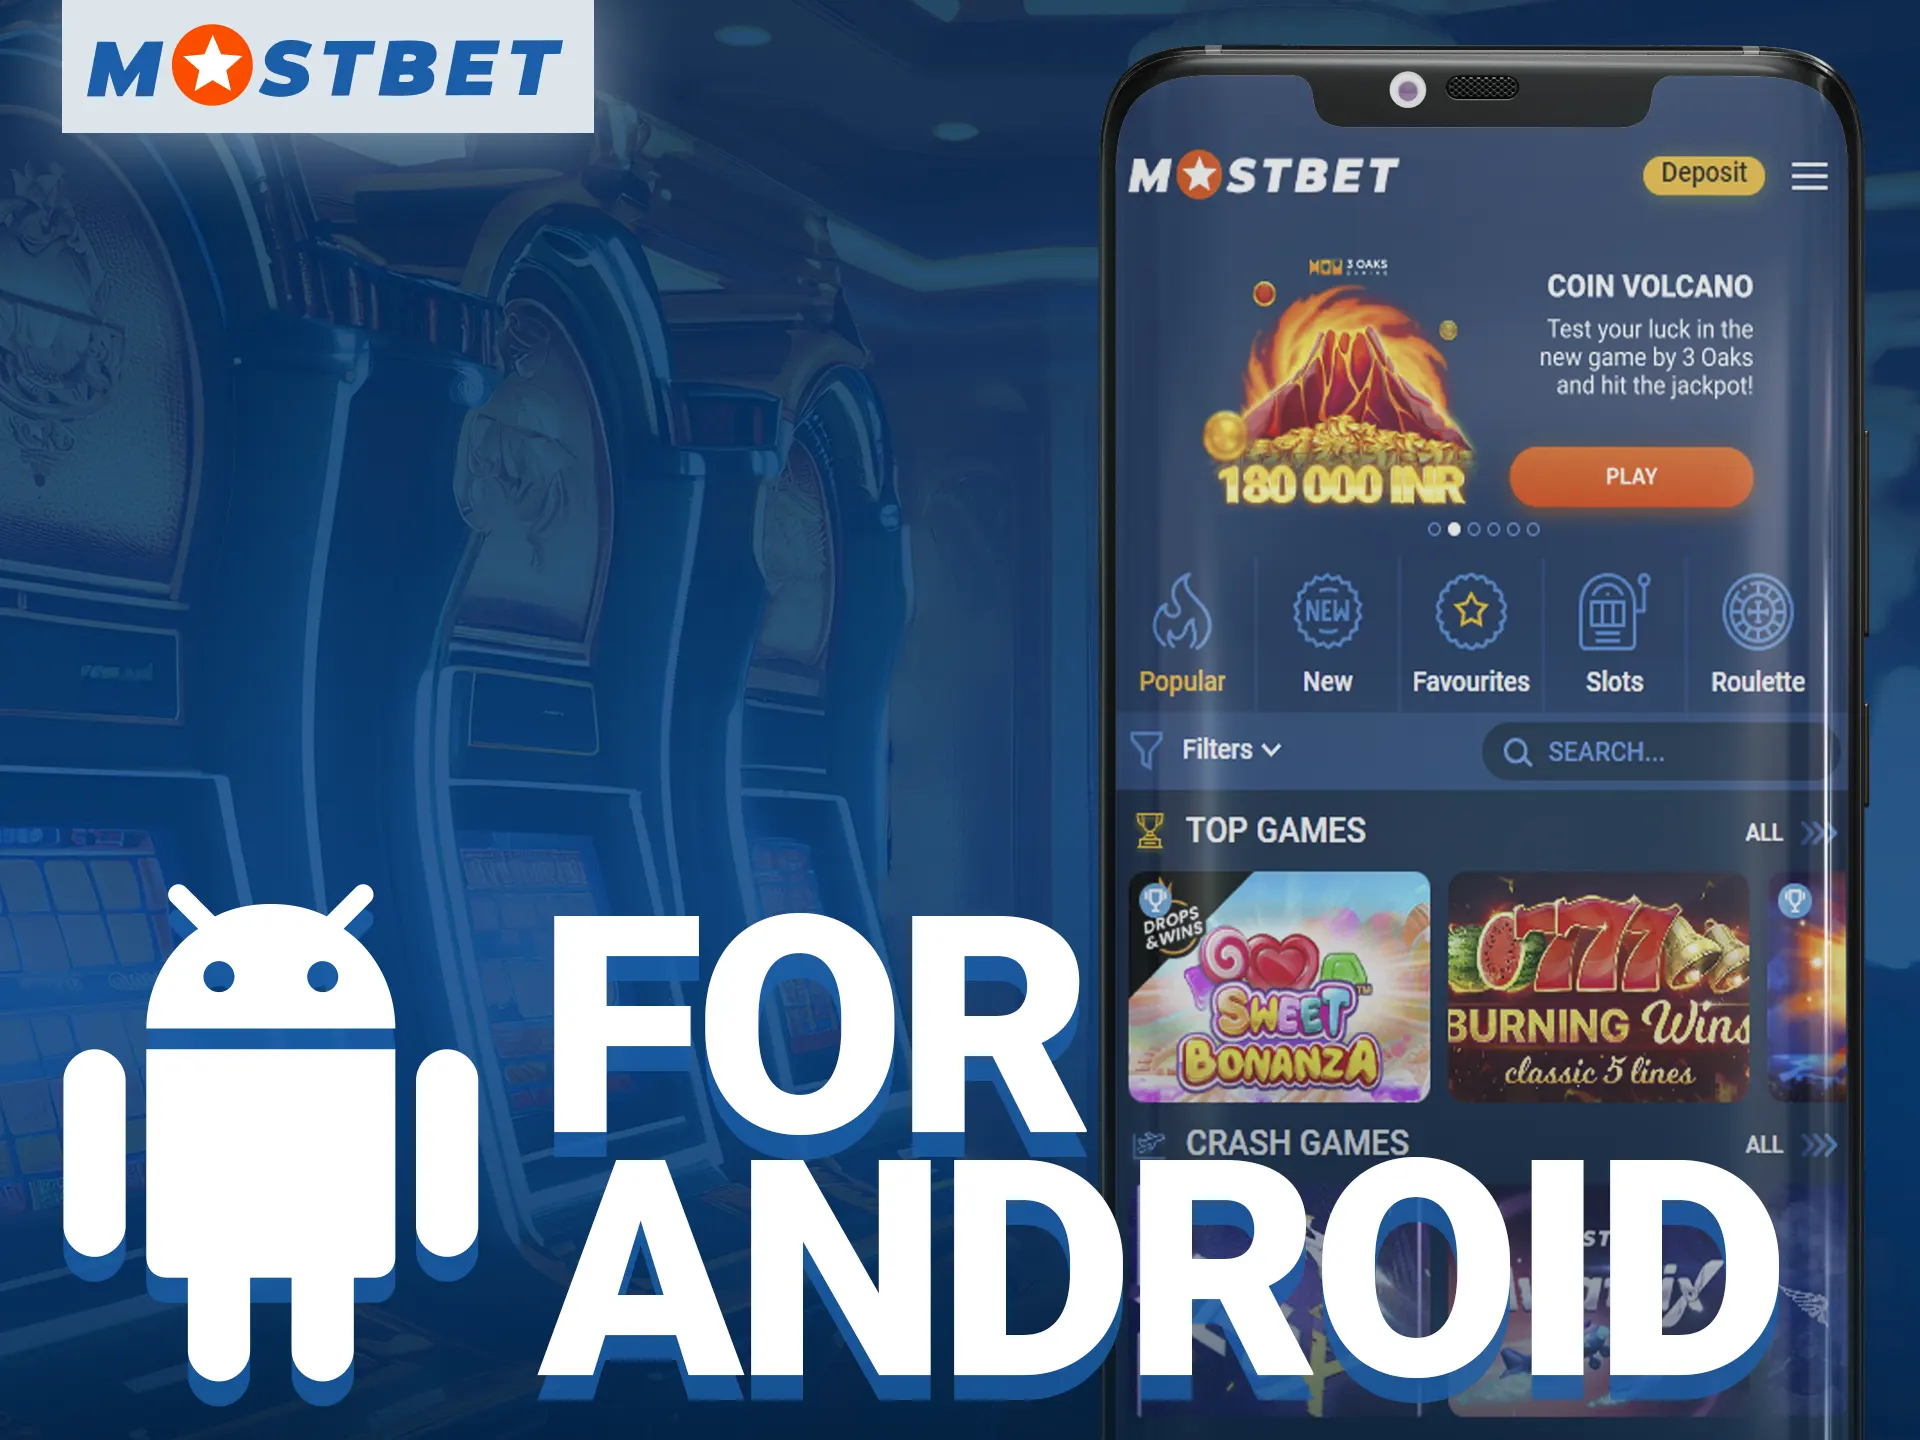 Install the Mostbet mobile app on your Android device.